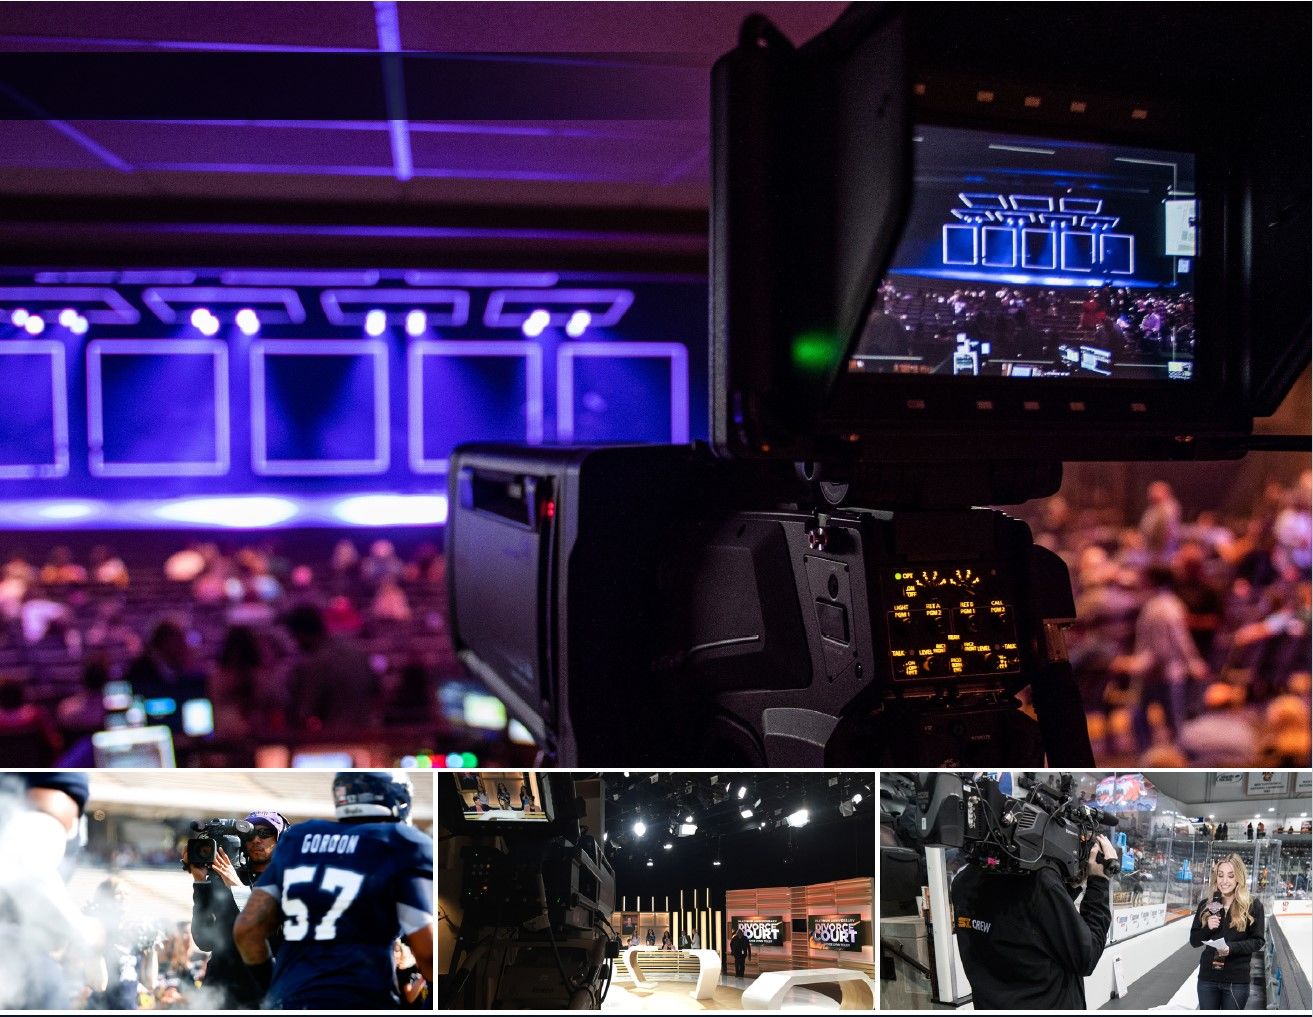 panasonic broadcast studio camera systems for sports live events concerts TV livestreaming and church productions